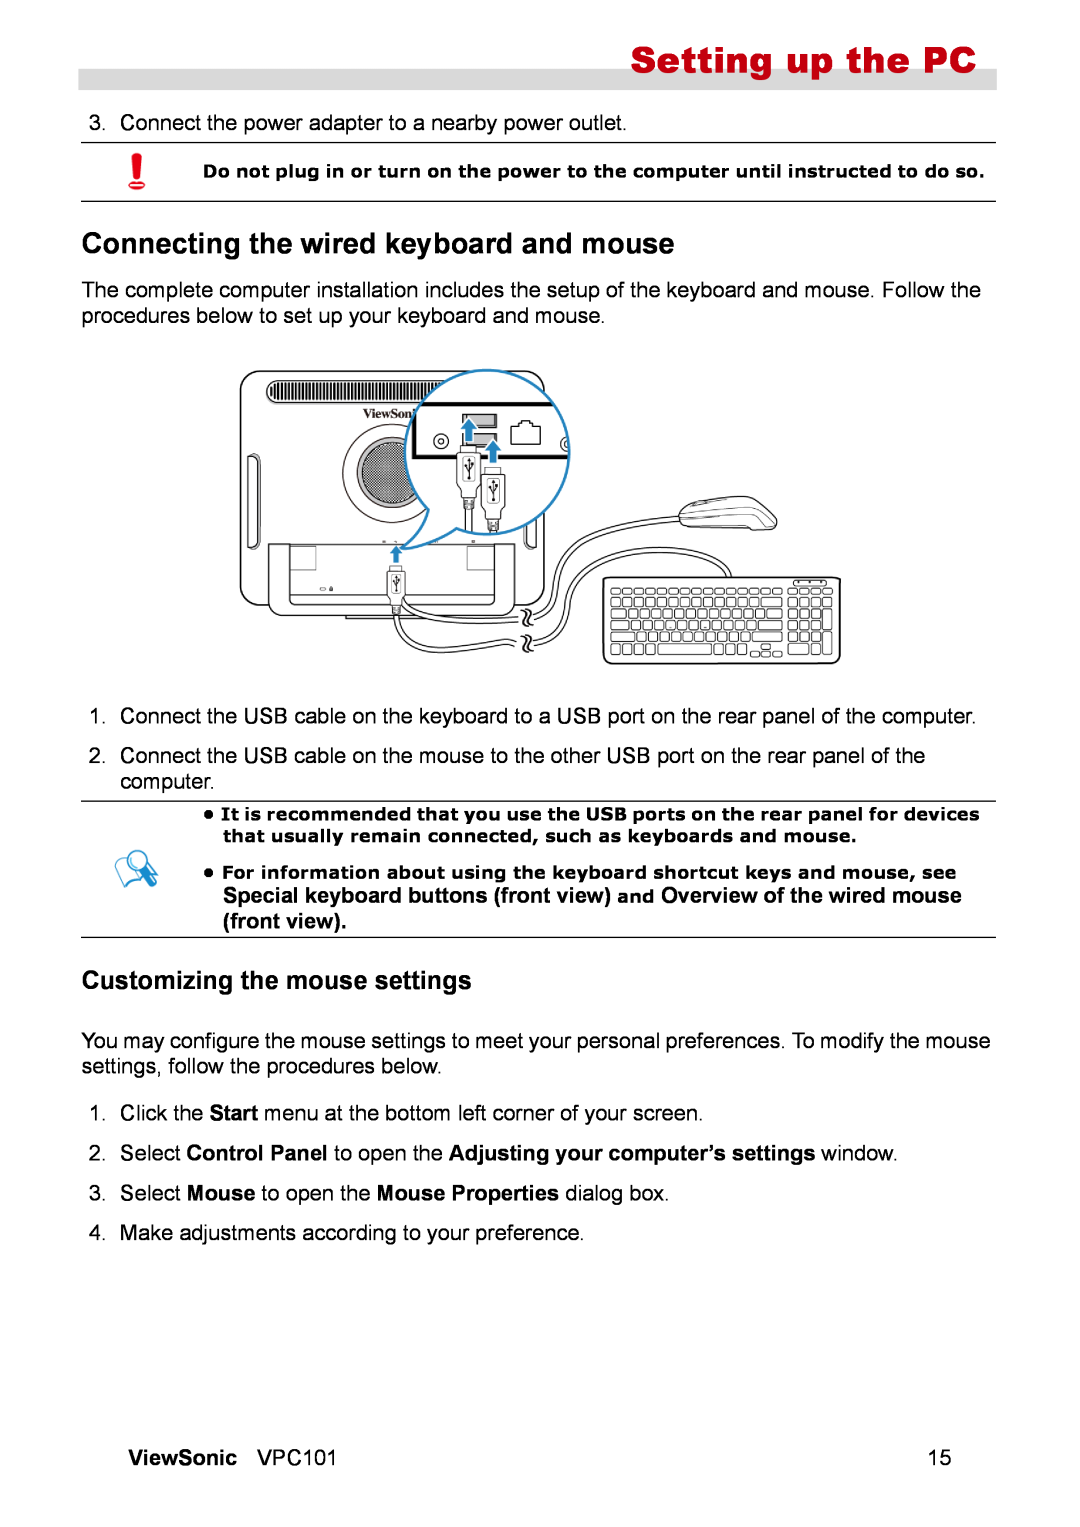 ViewSonic VPC101 manual Connecting the wired keyboard and mouse, Customizing the mouse settings, Setting up the PC 